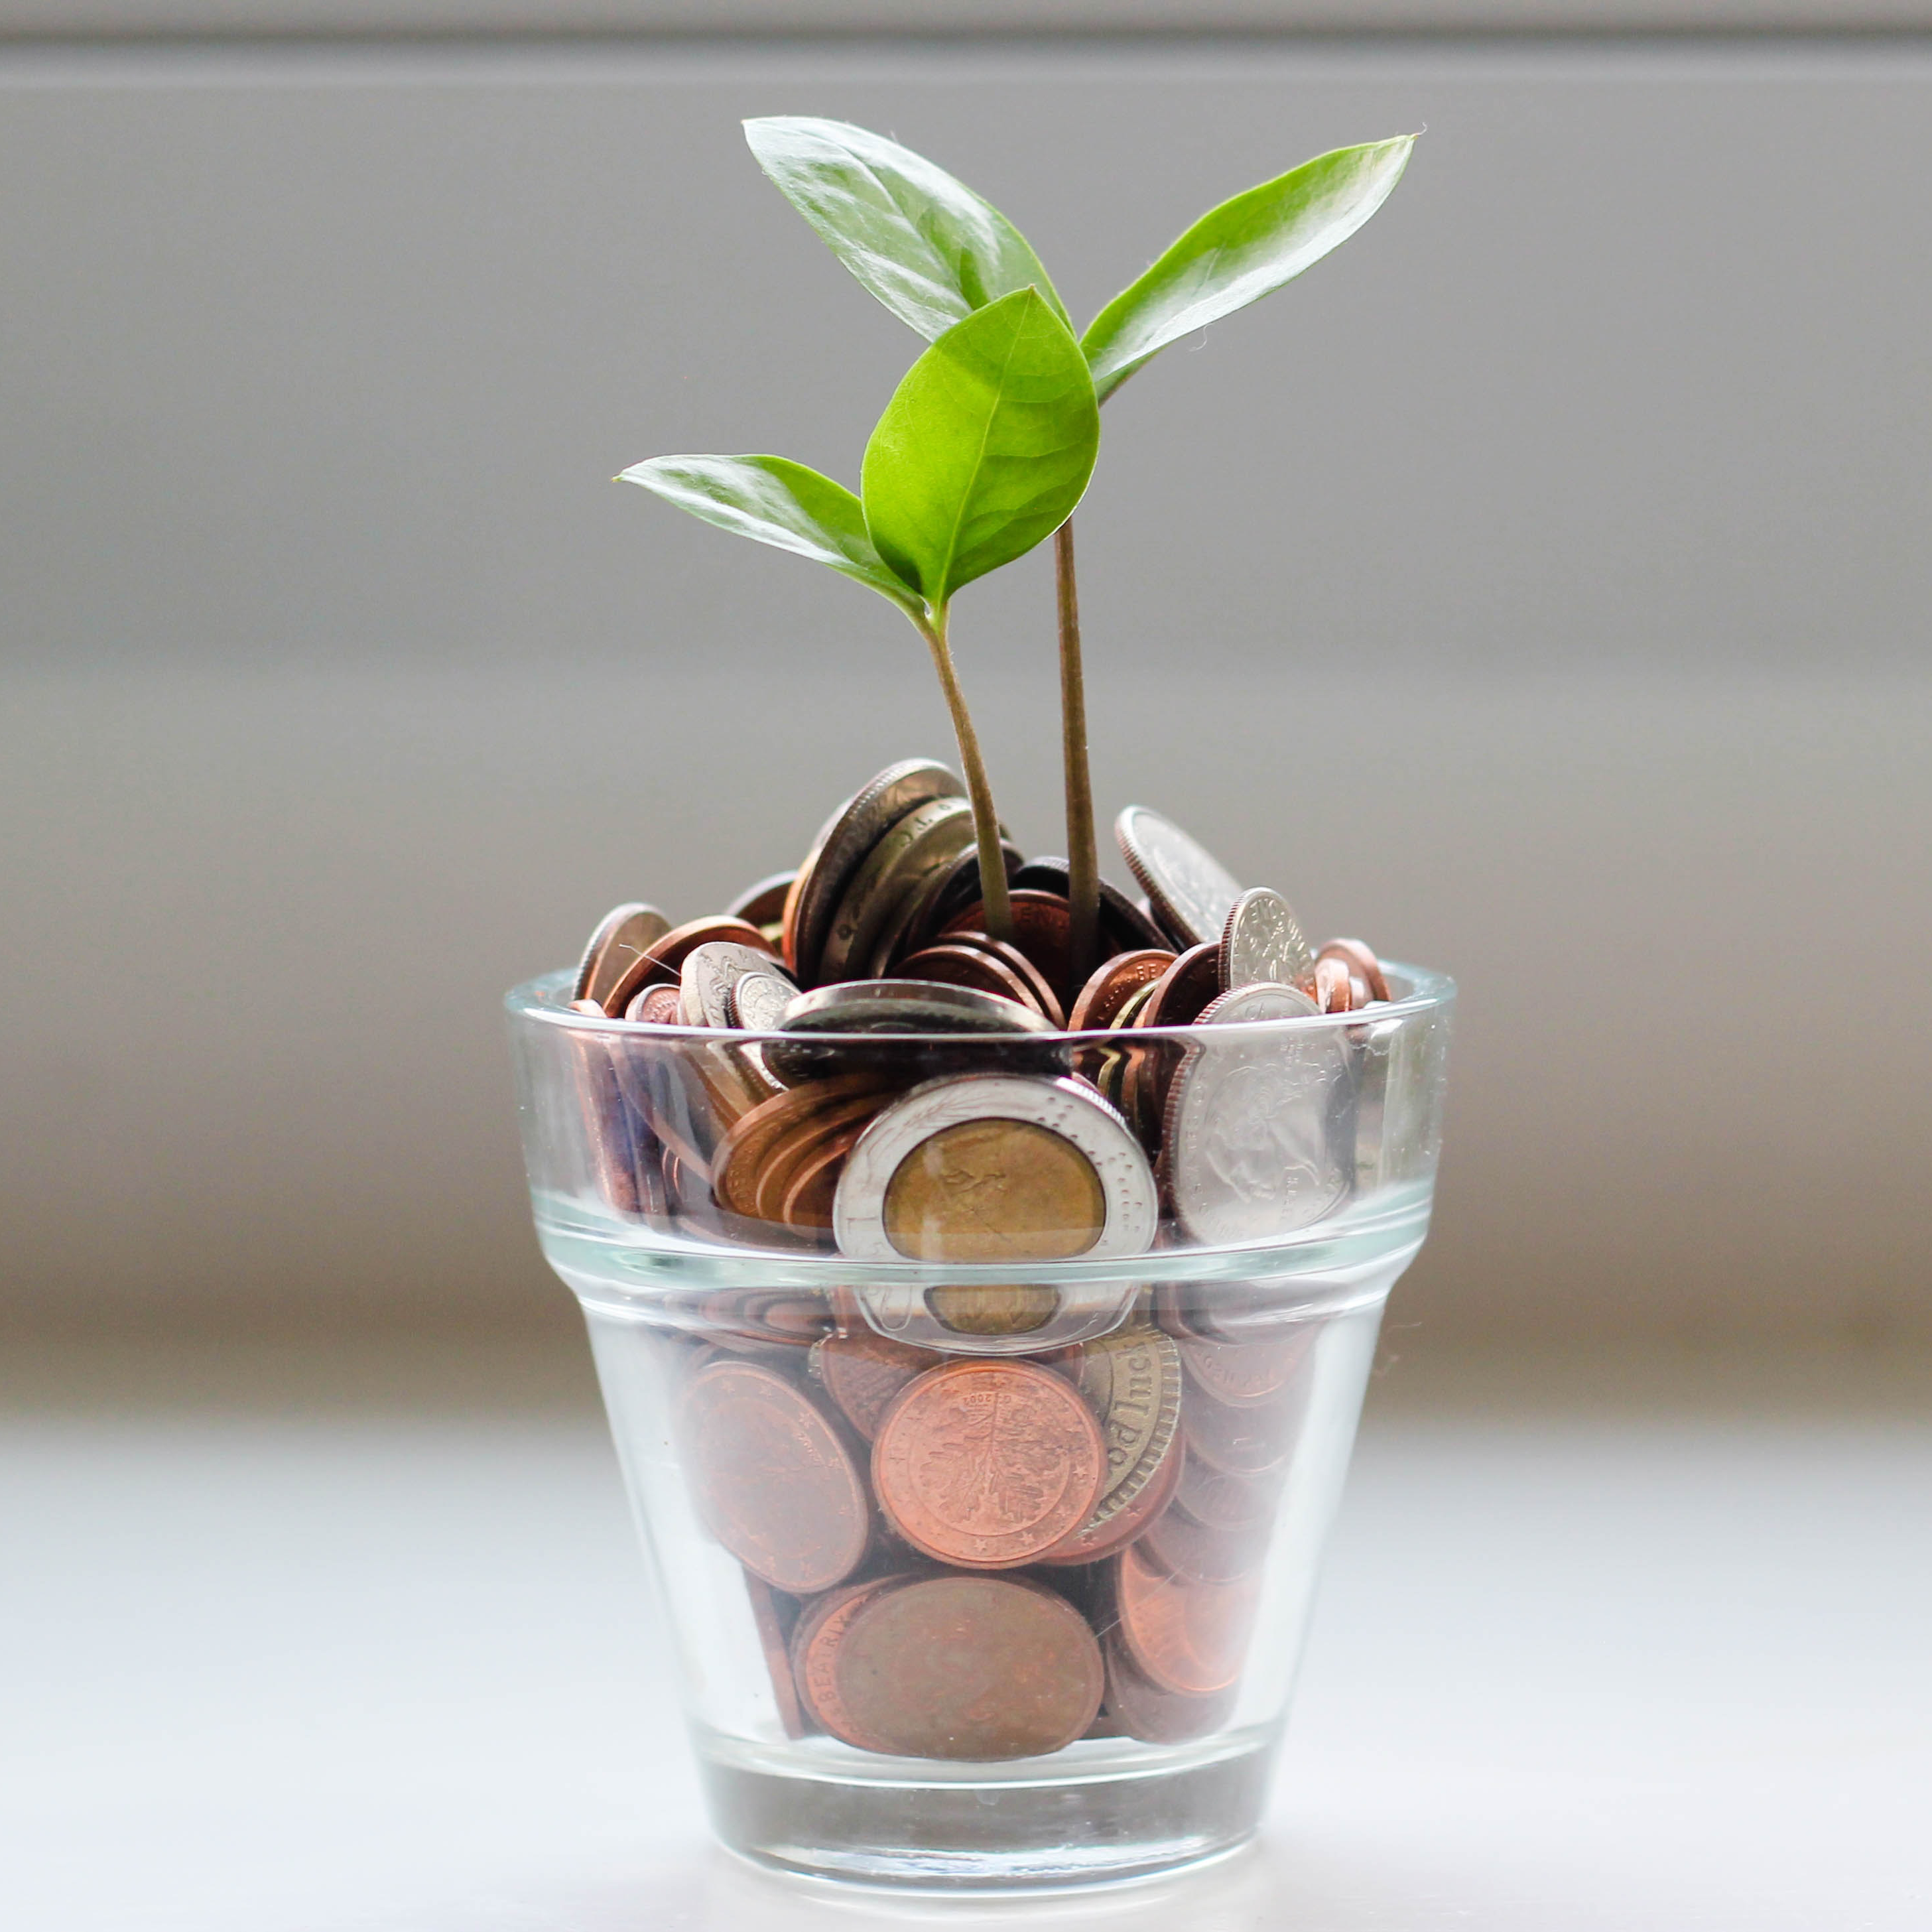 Glass flowerpot holding coins with flower growing from center